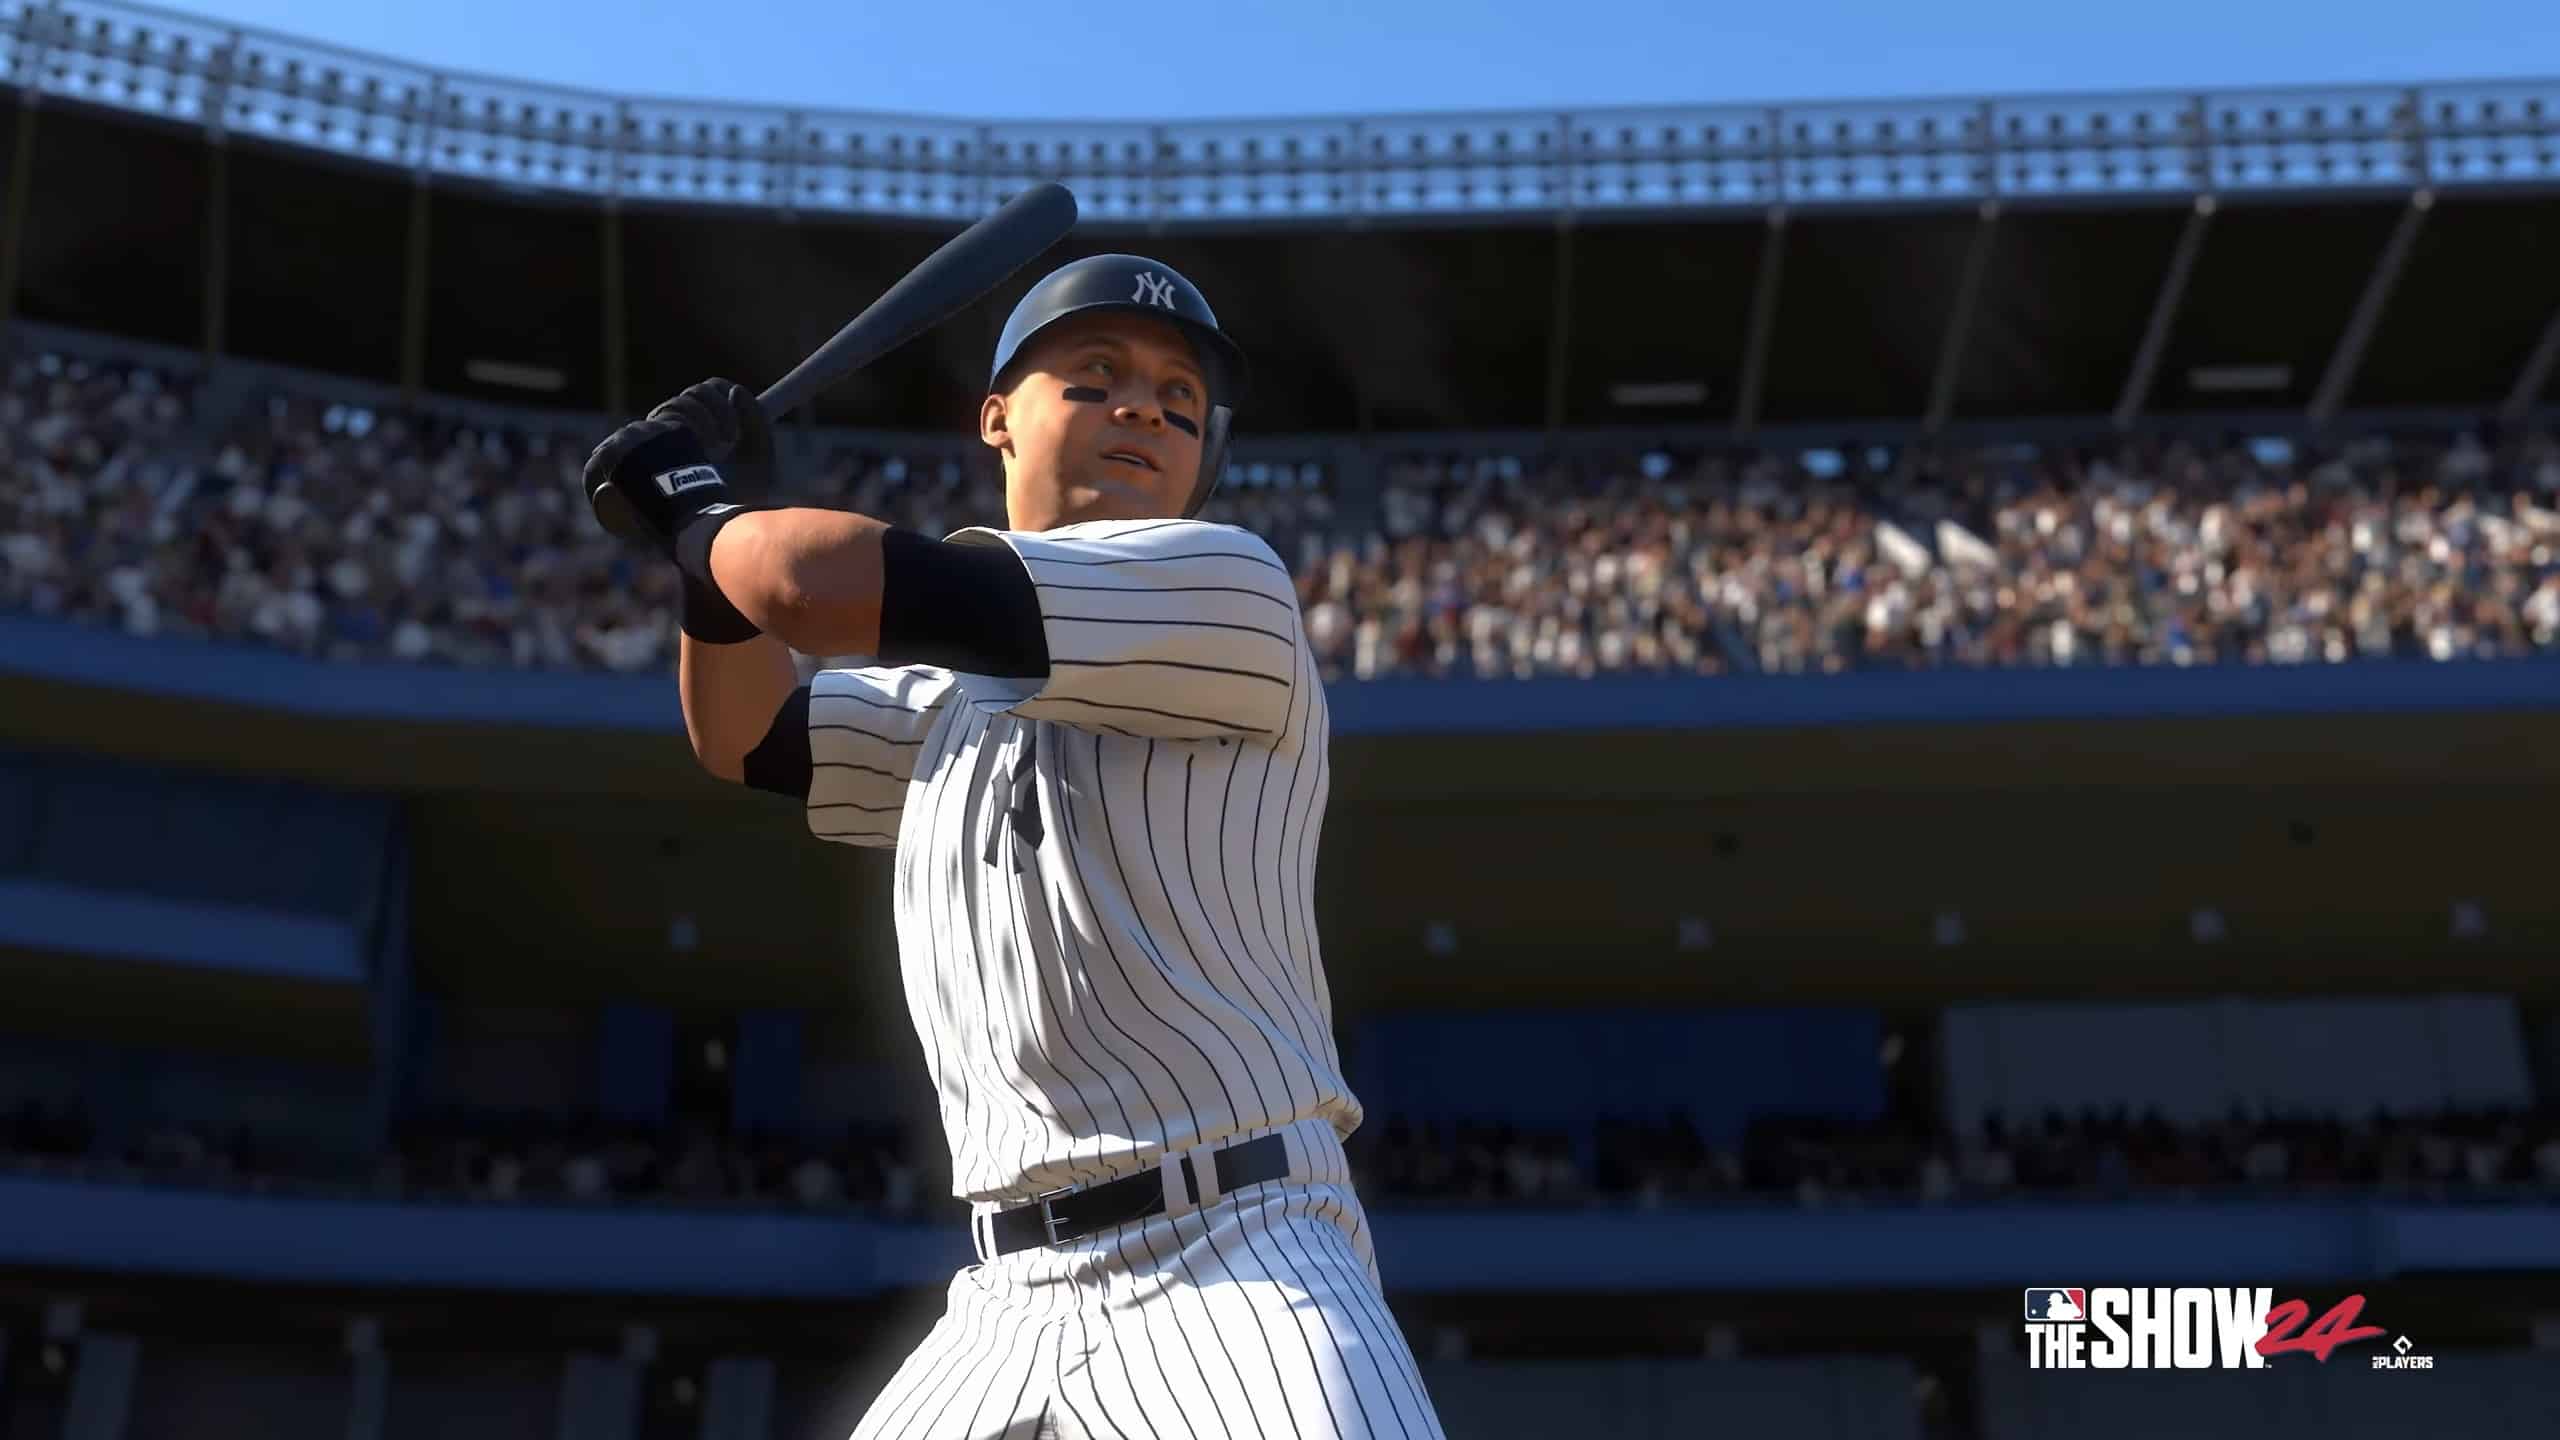 A baseball player from the Yankees ready to bat in a stadium, from the video game "MLB The Show 24".